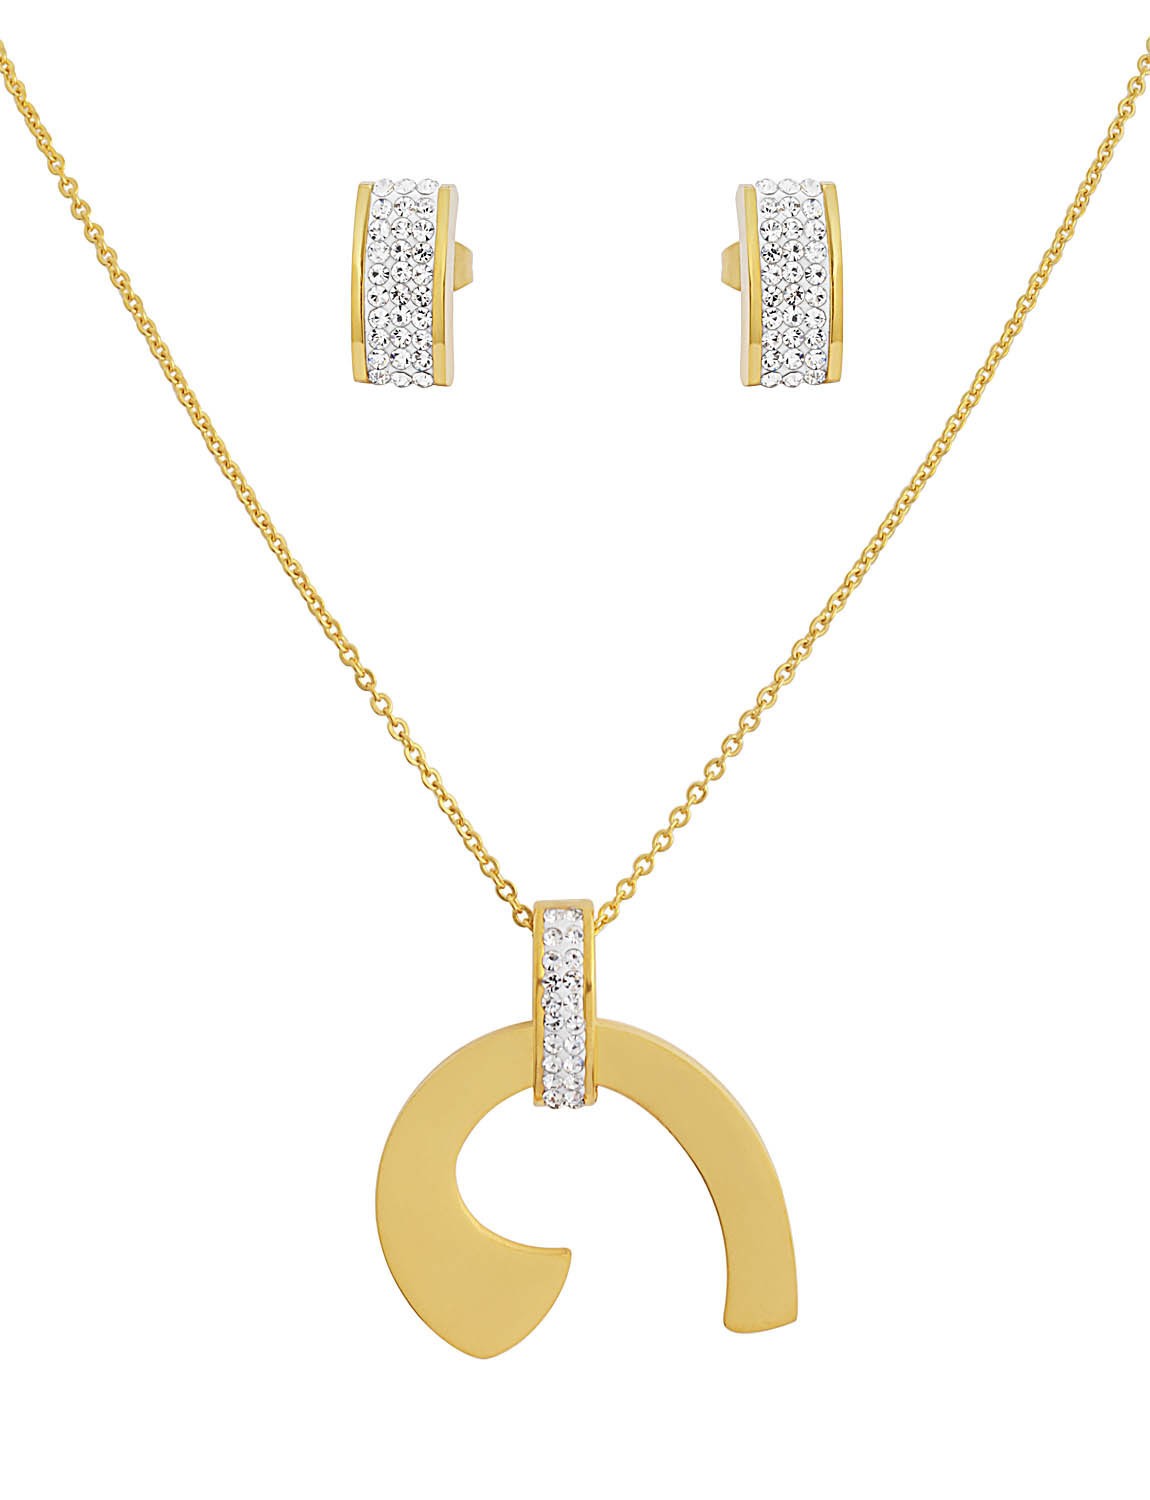 Stainless Steel Gold Tone Earring & Pendant Set With CZ Stones 17 Inches Long With 2 Inches Extension